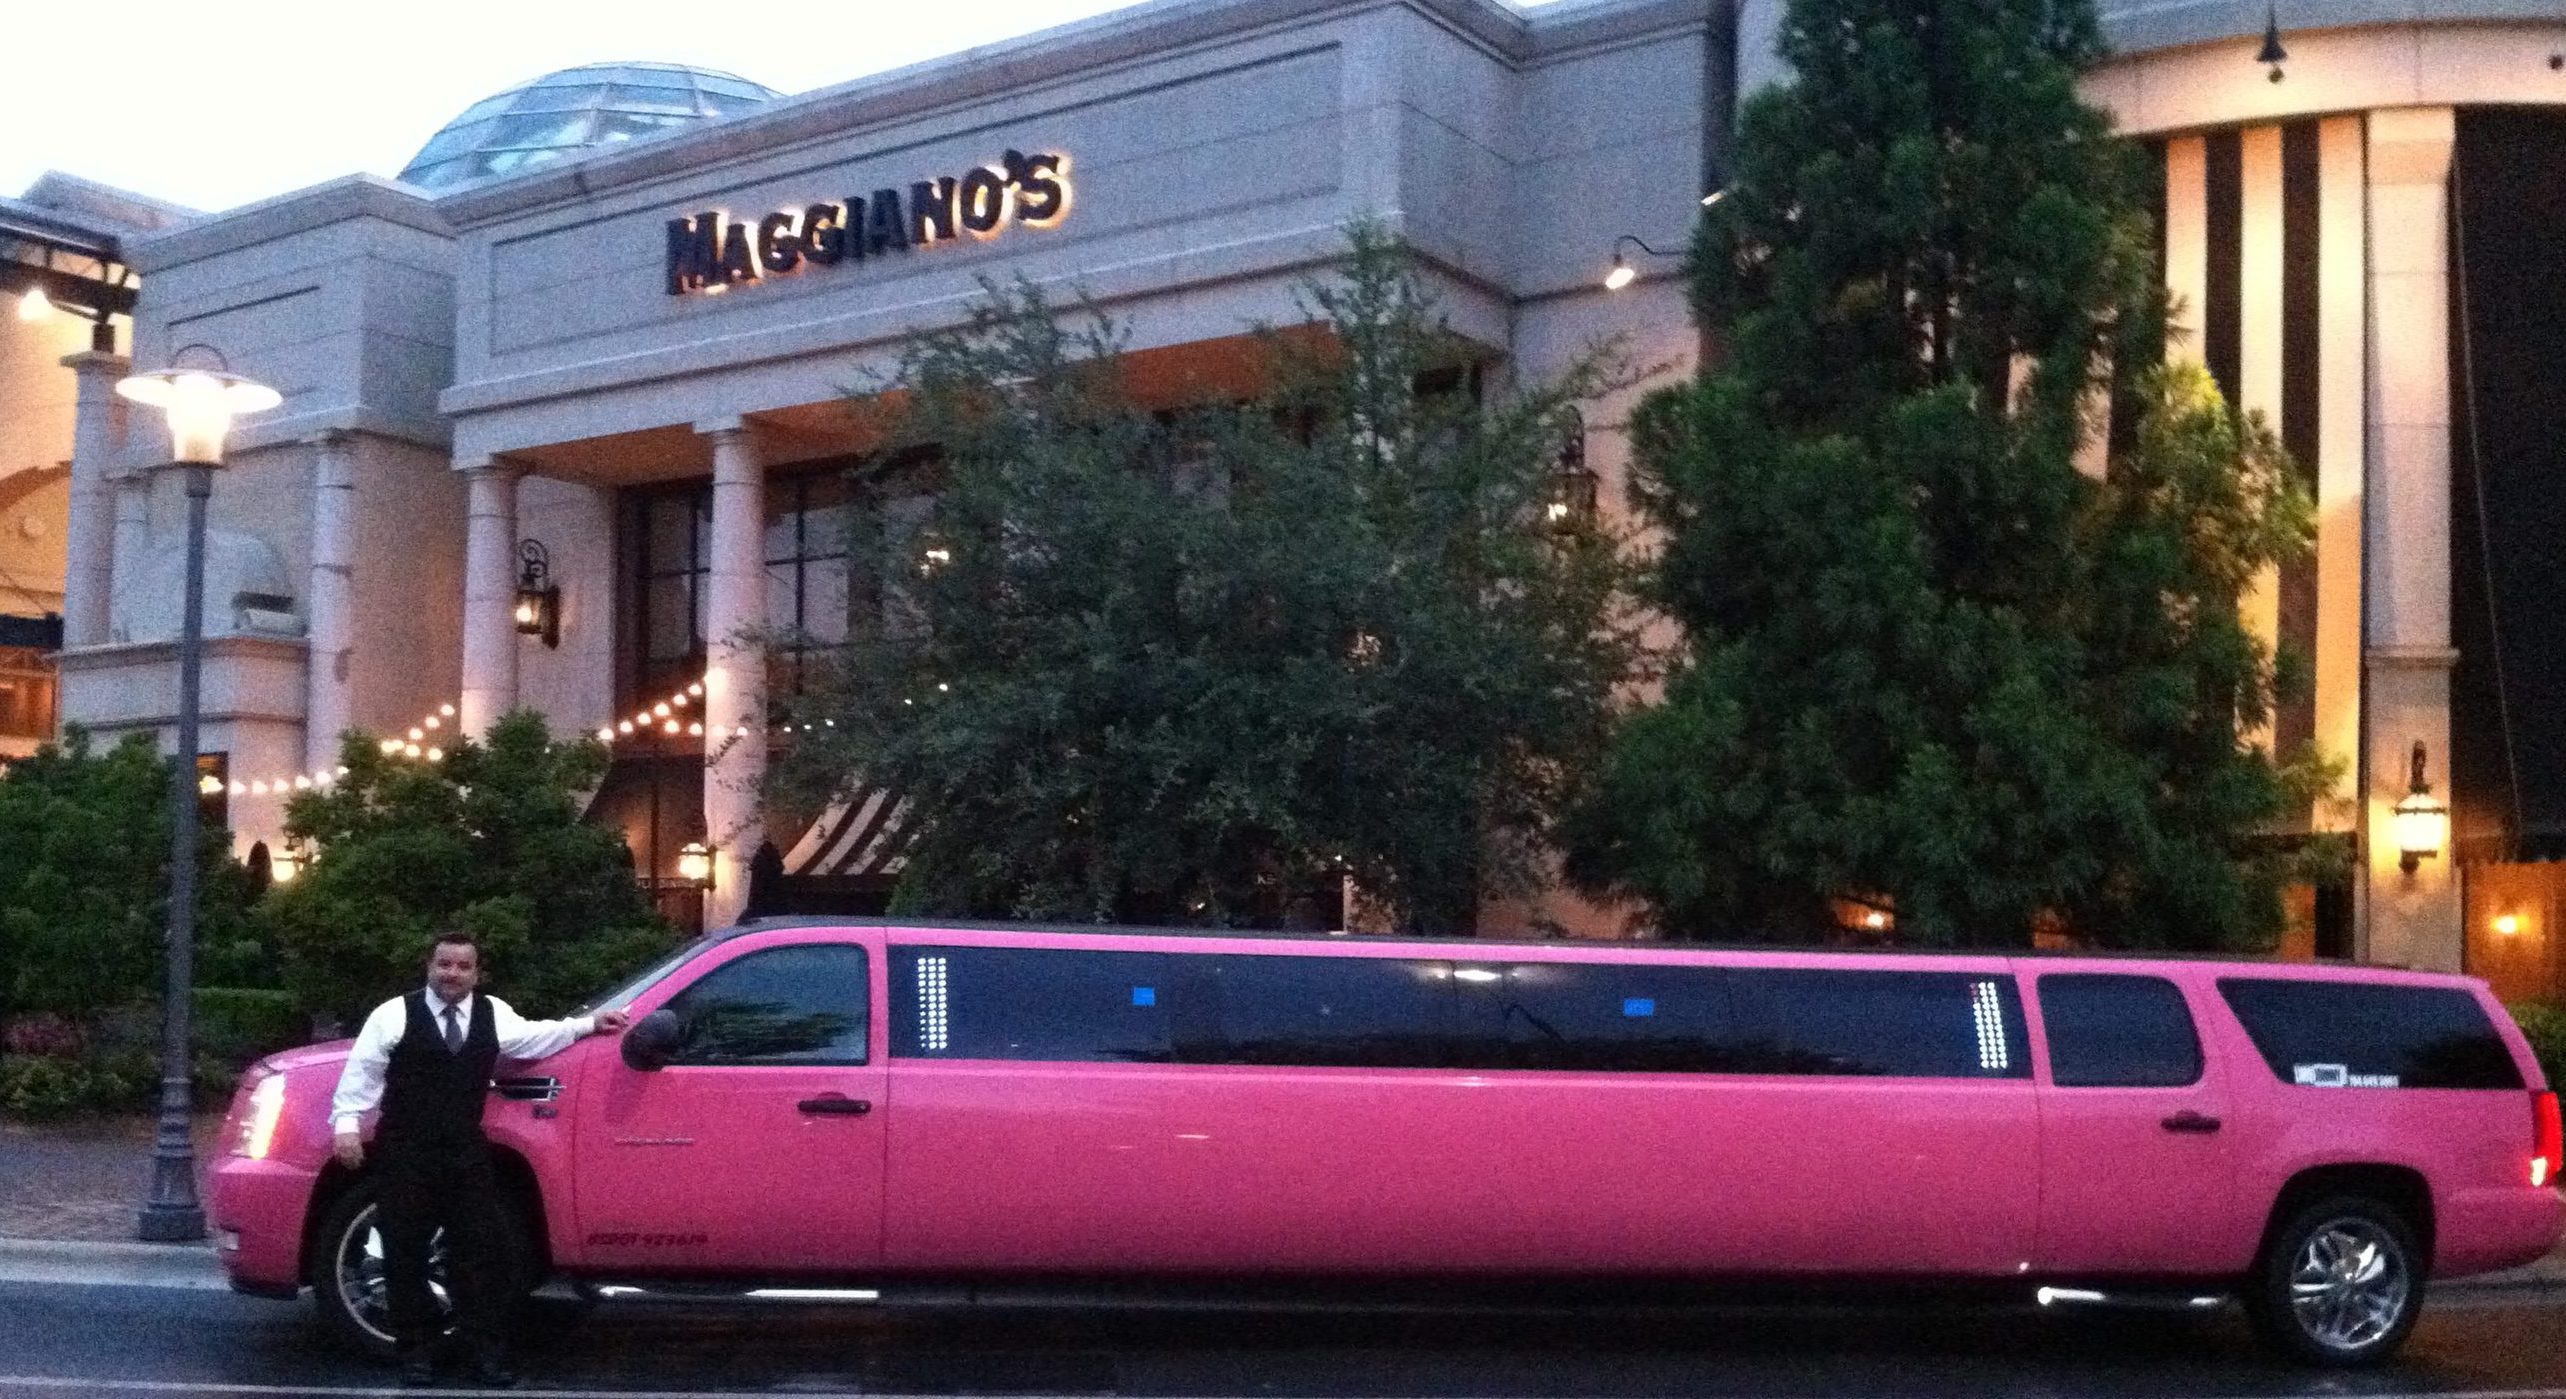 Maggianos pink limo Johnny B's